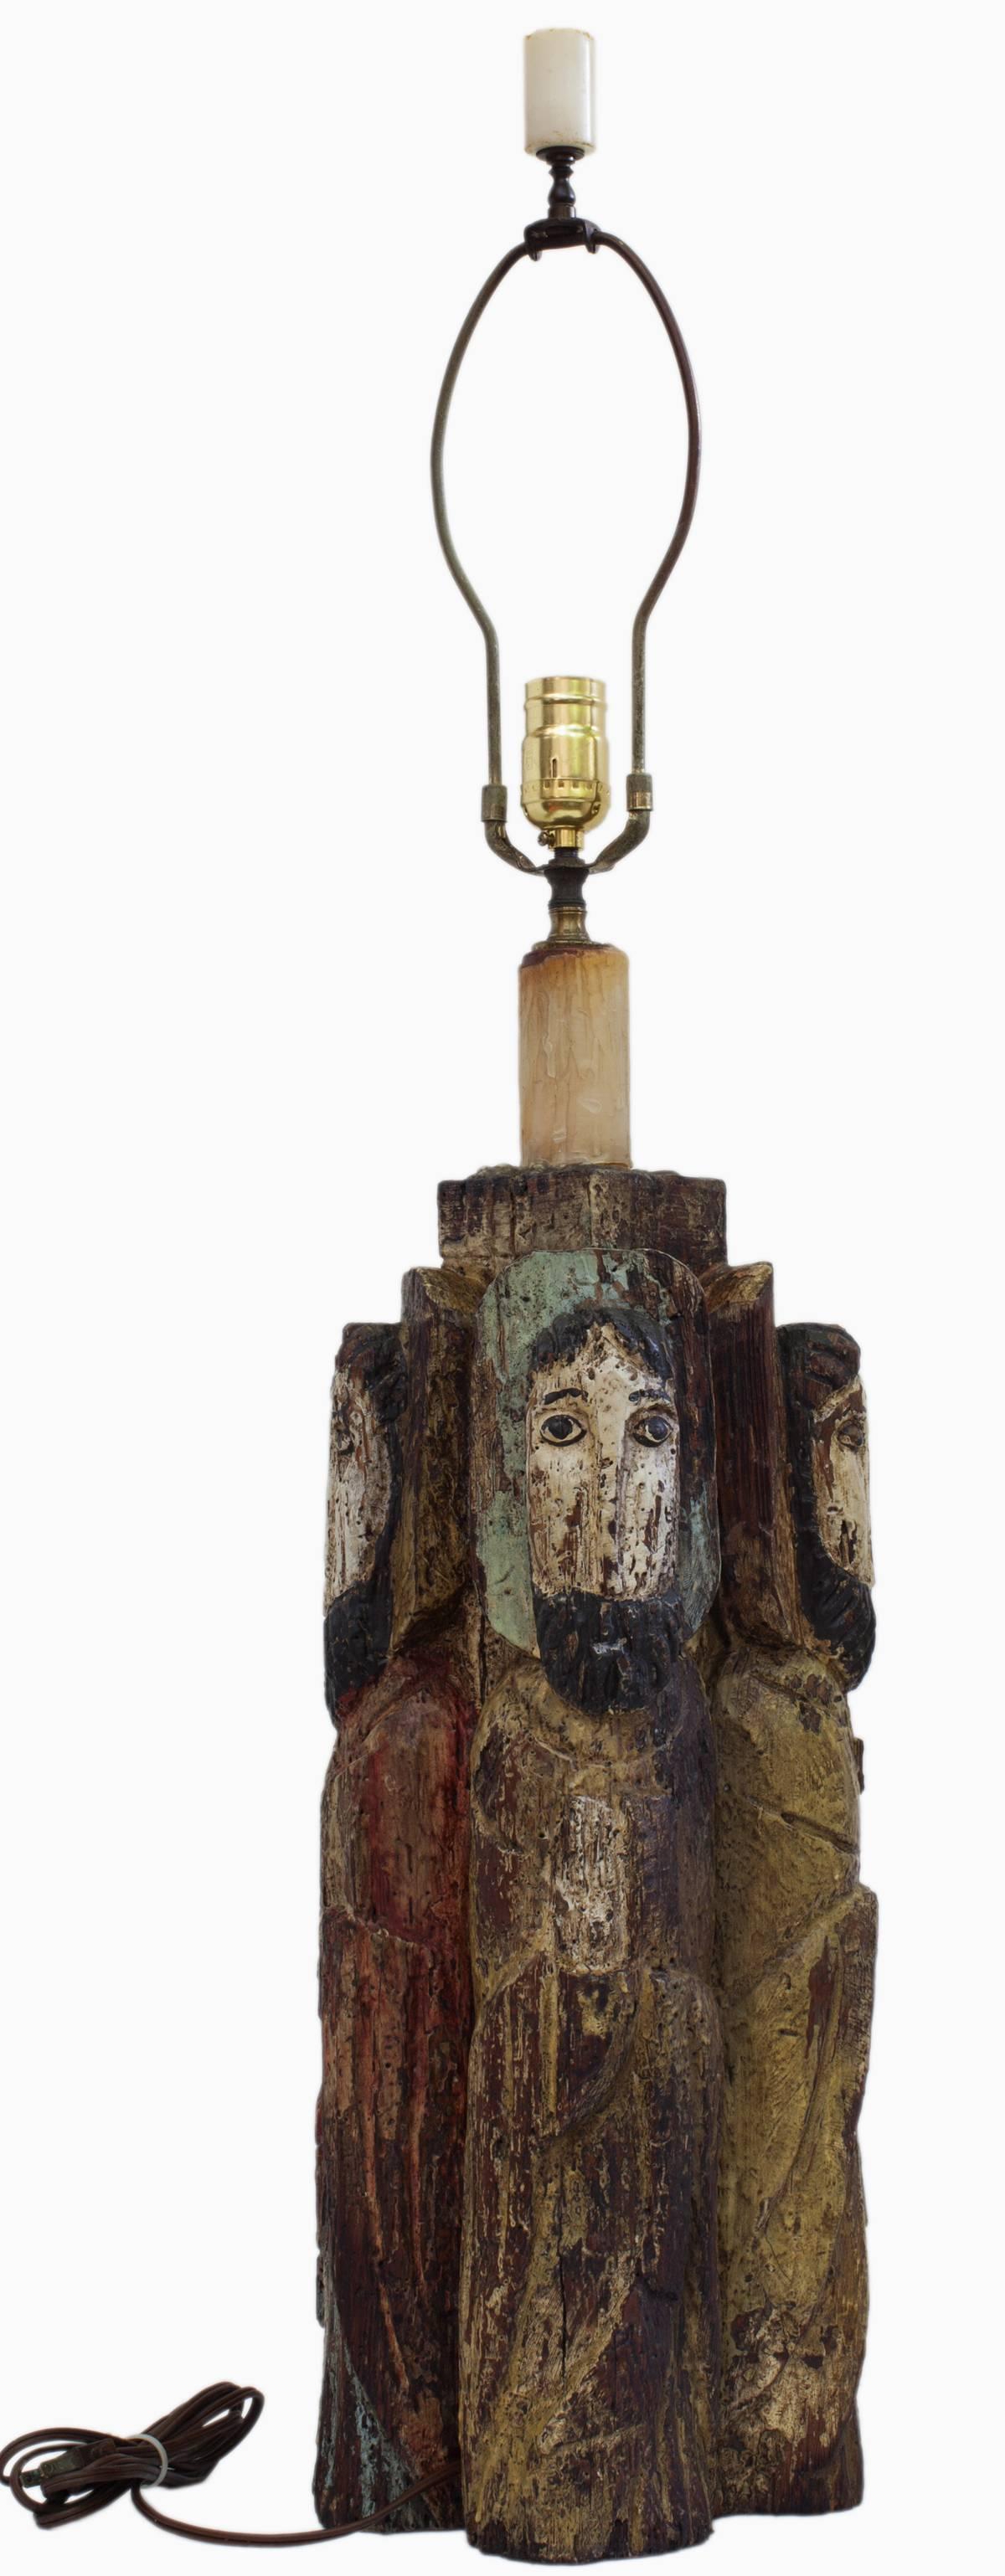 Very interesting, Spanish Colonial style hand carved and painted wood lamp having four Bultos figures, one holding a key, likely St Peter, another is beardless and holds a staff. By an unknown Santero, c. 1950.